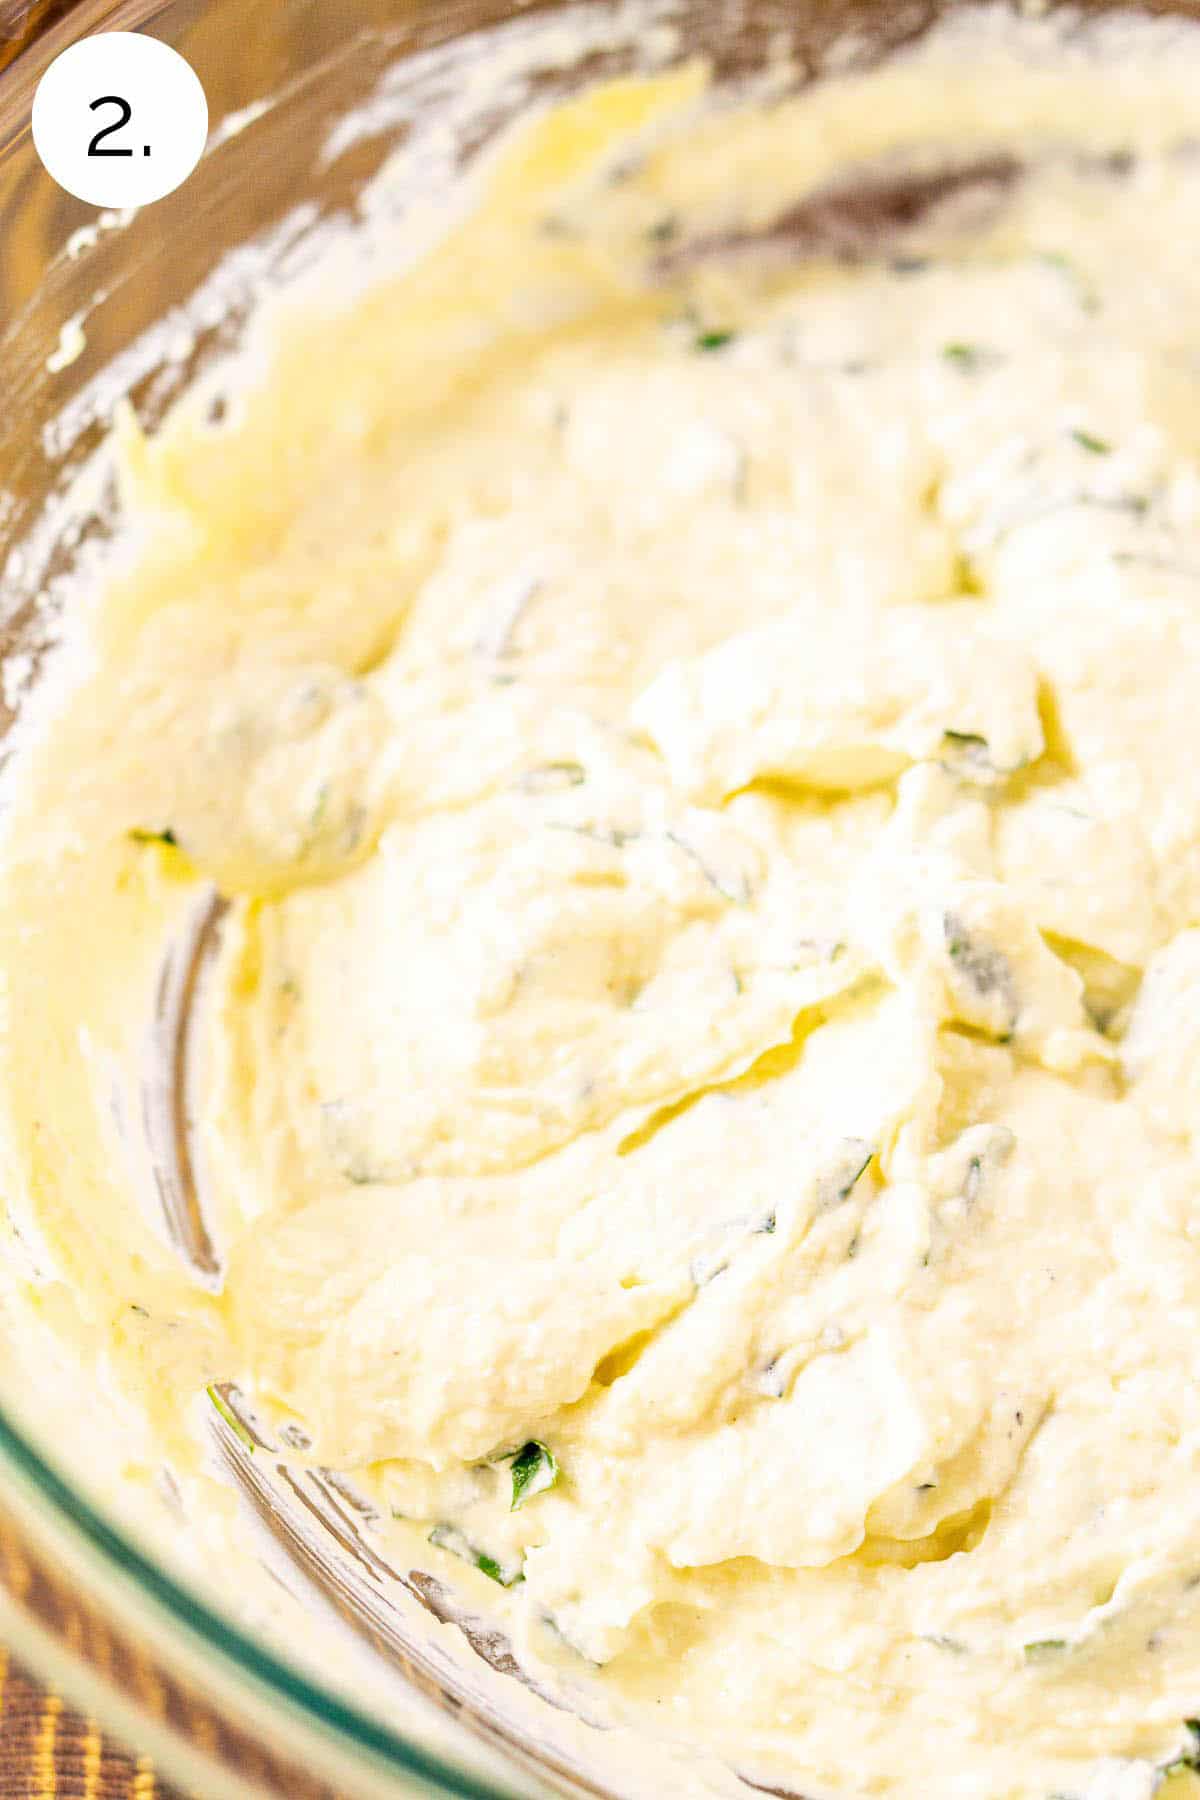 The ricotta filling stirred together to make one cohesive mixture in a large glass mixing bowl.